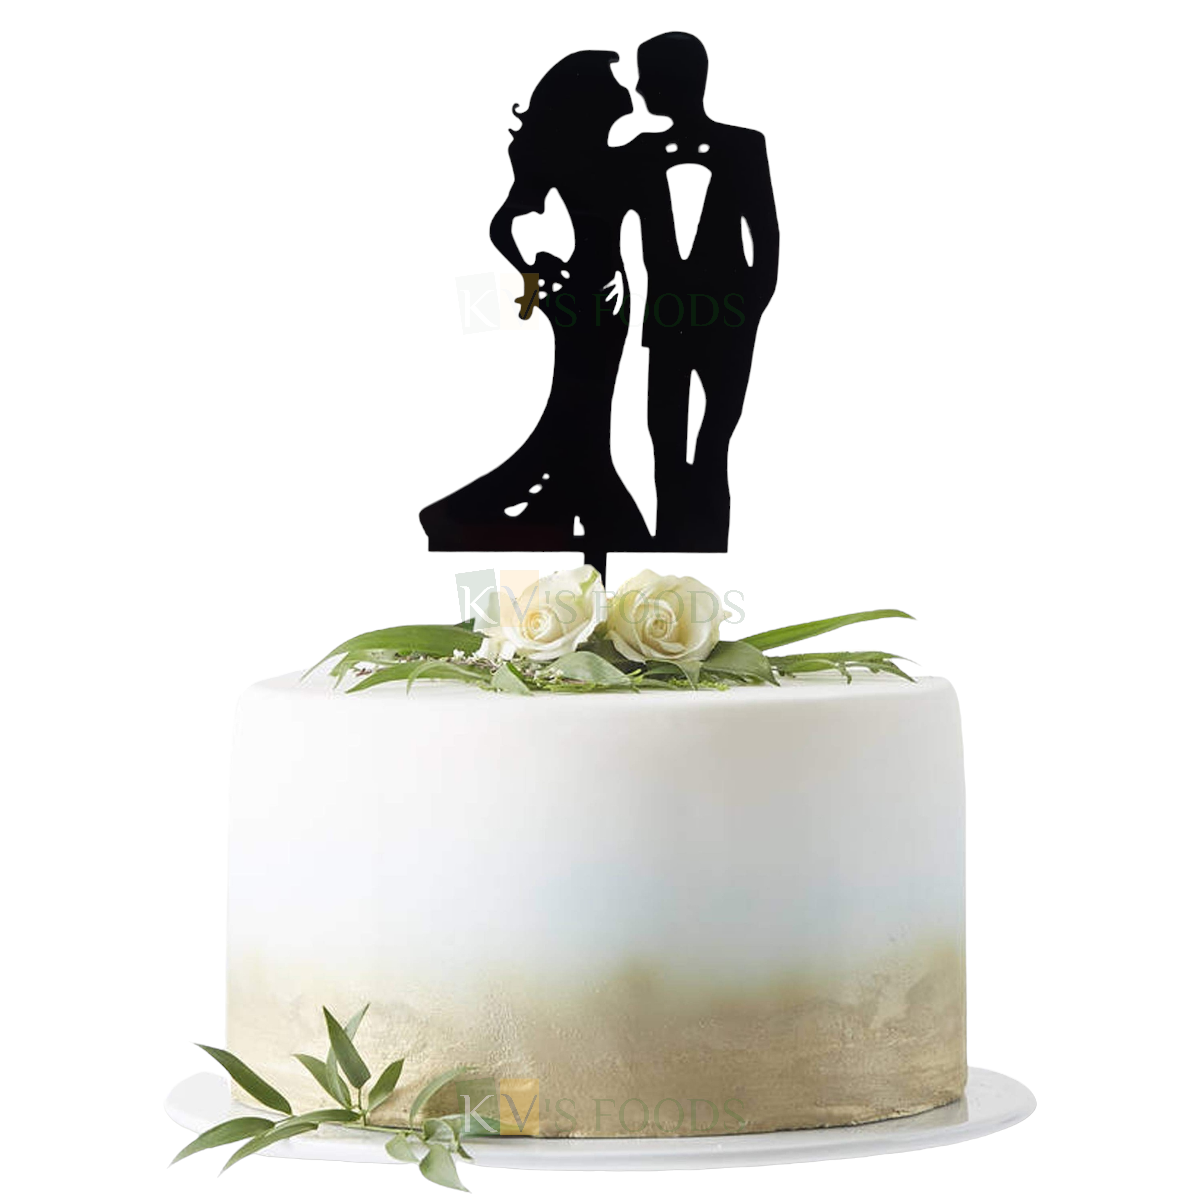 1PC Black Acrylic Dancing Bride and Groom Couple Cake Topper, Romantic Engagement Cake Topper, Silhouette Cake Topper, Cake Tops for Happy Anniversary Theme DIY Cake Decoration